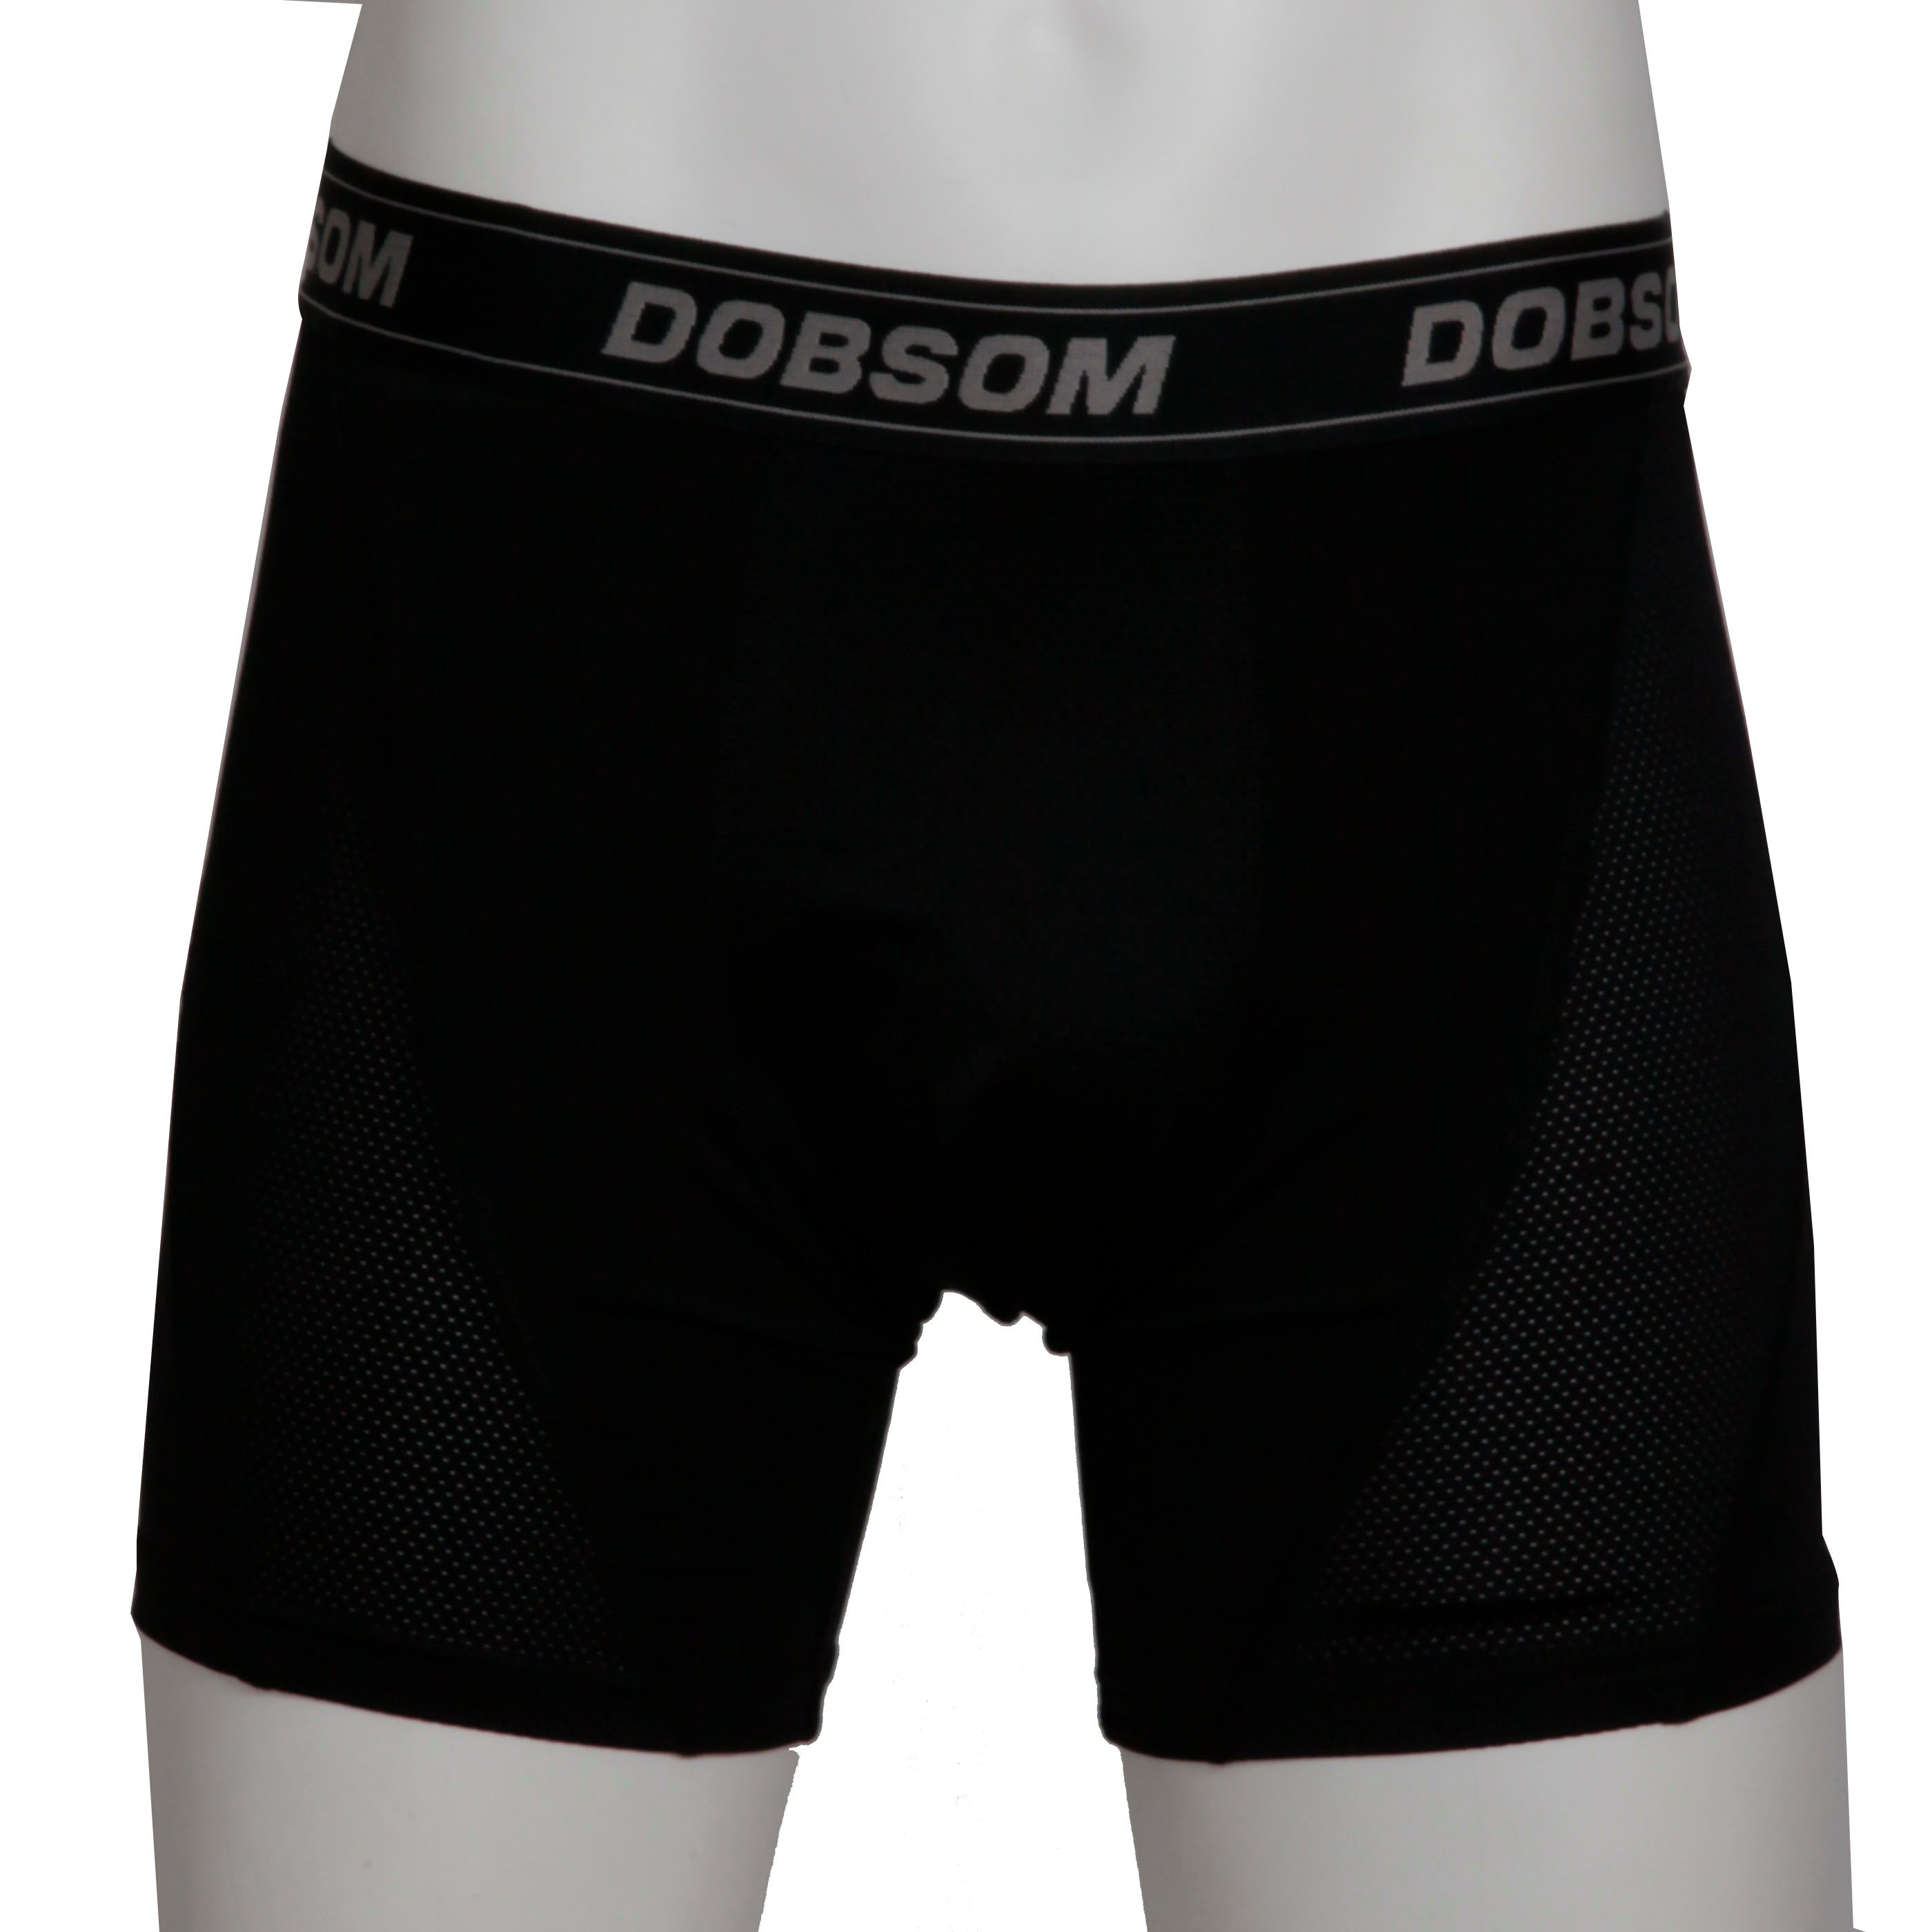 Buy Dobsom Kirmo Func. Boxer 2p from Outnorth